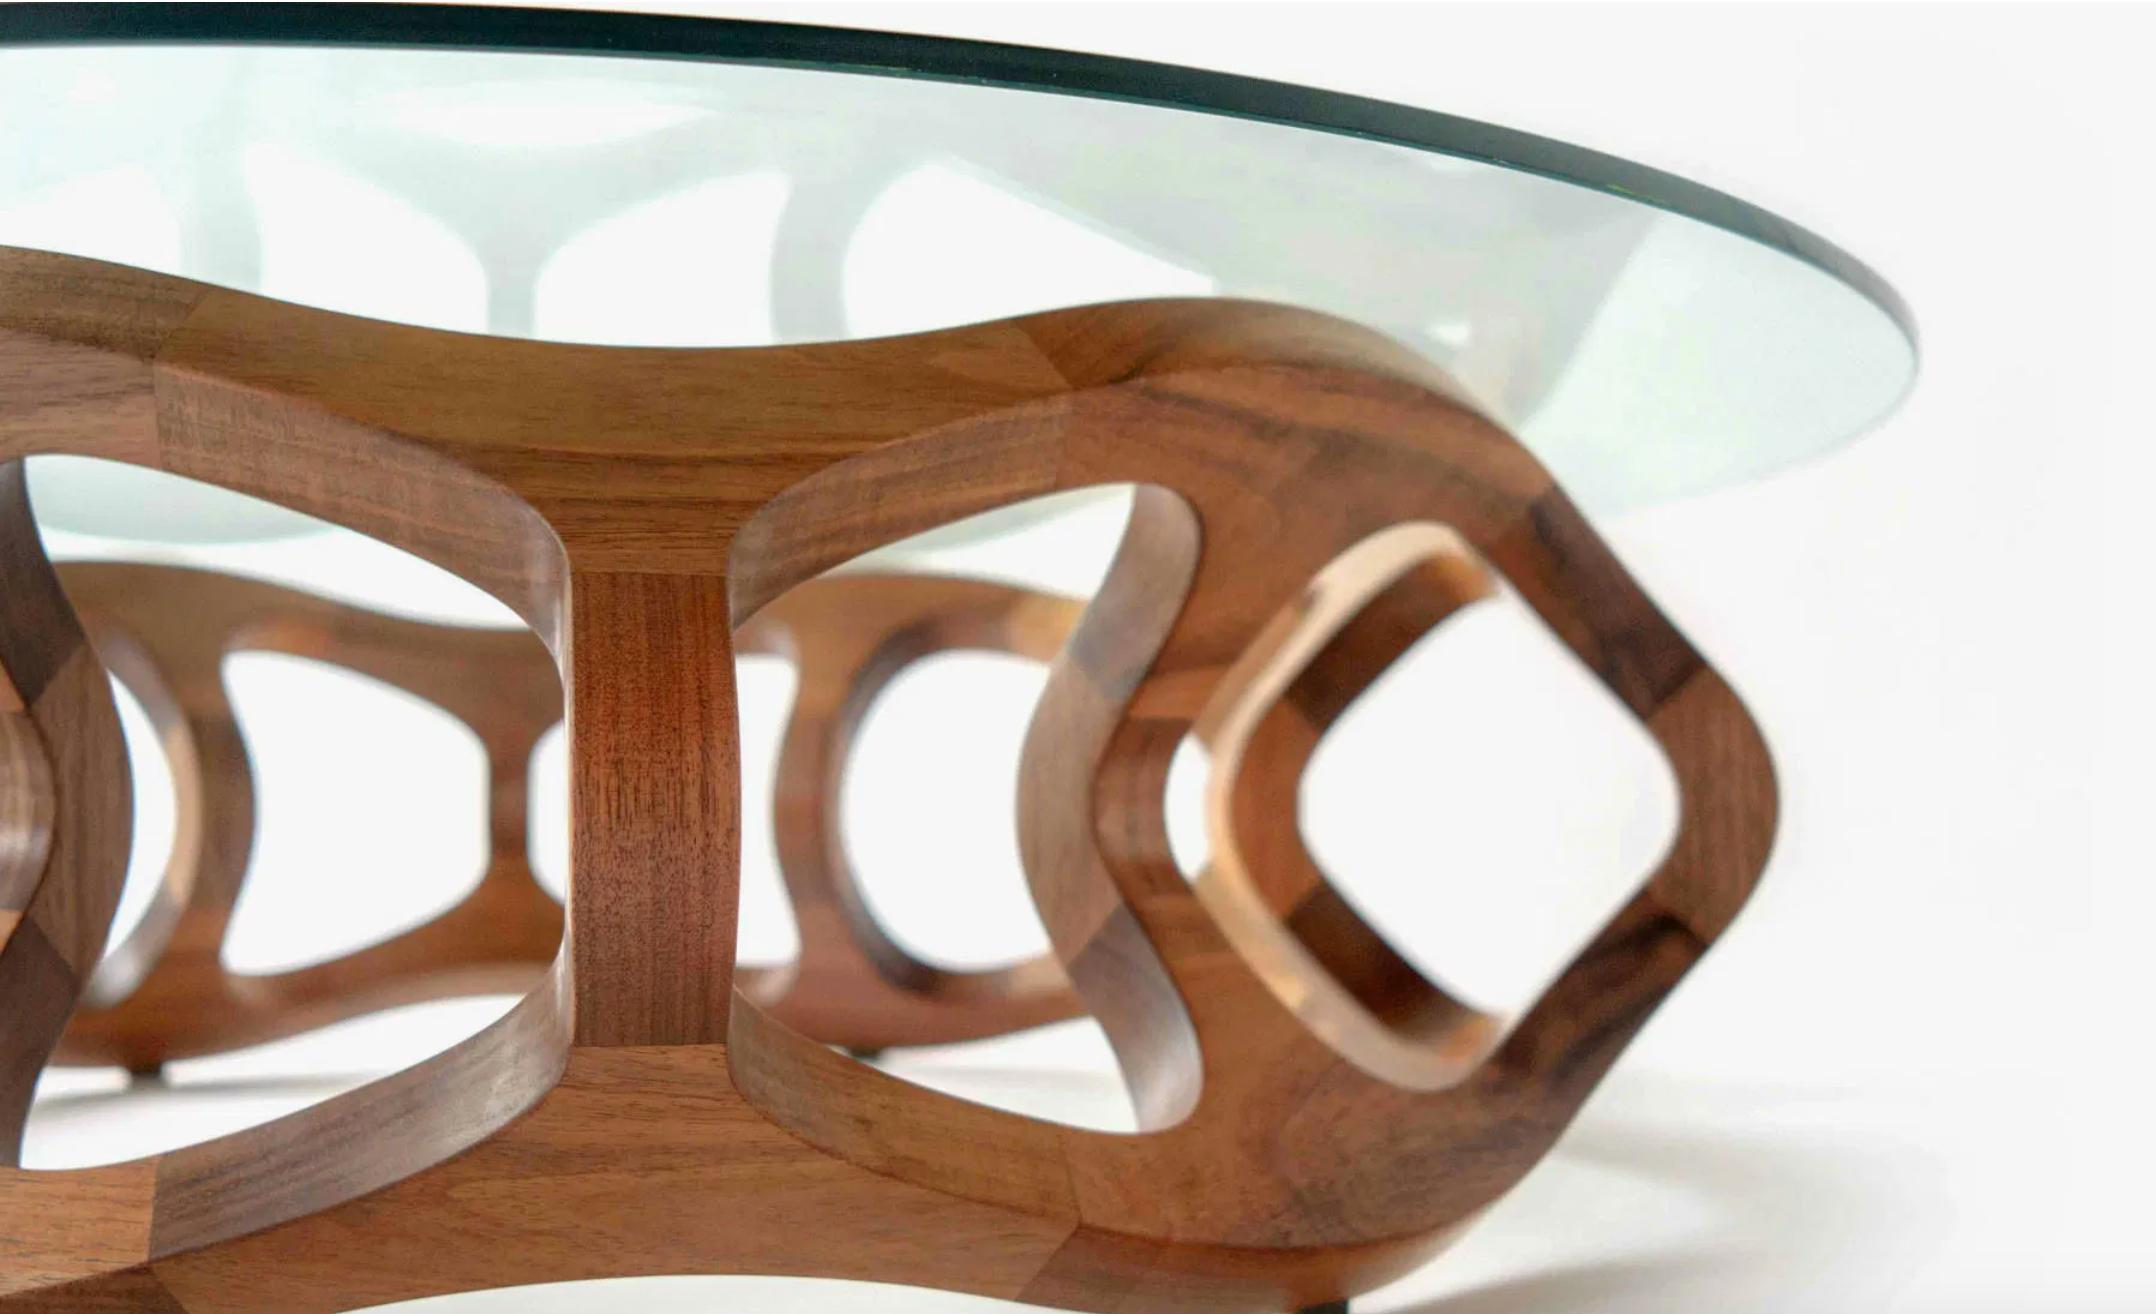 Mexican Contemporary Center Table in Tzalam Wood from Mexico For Sale